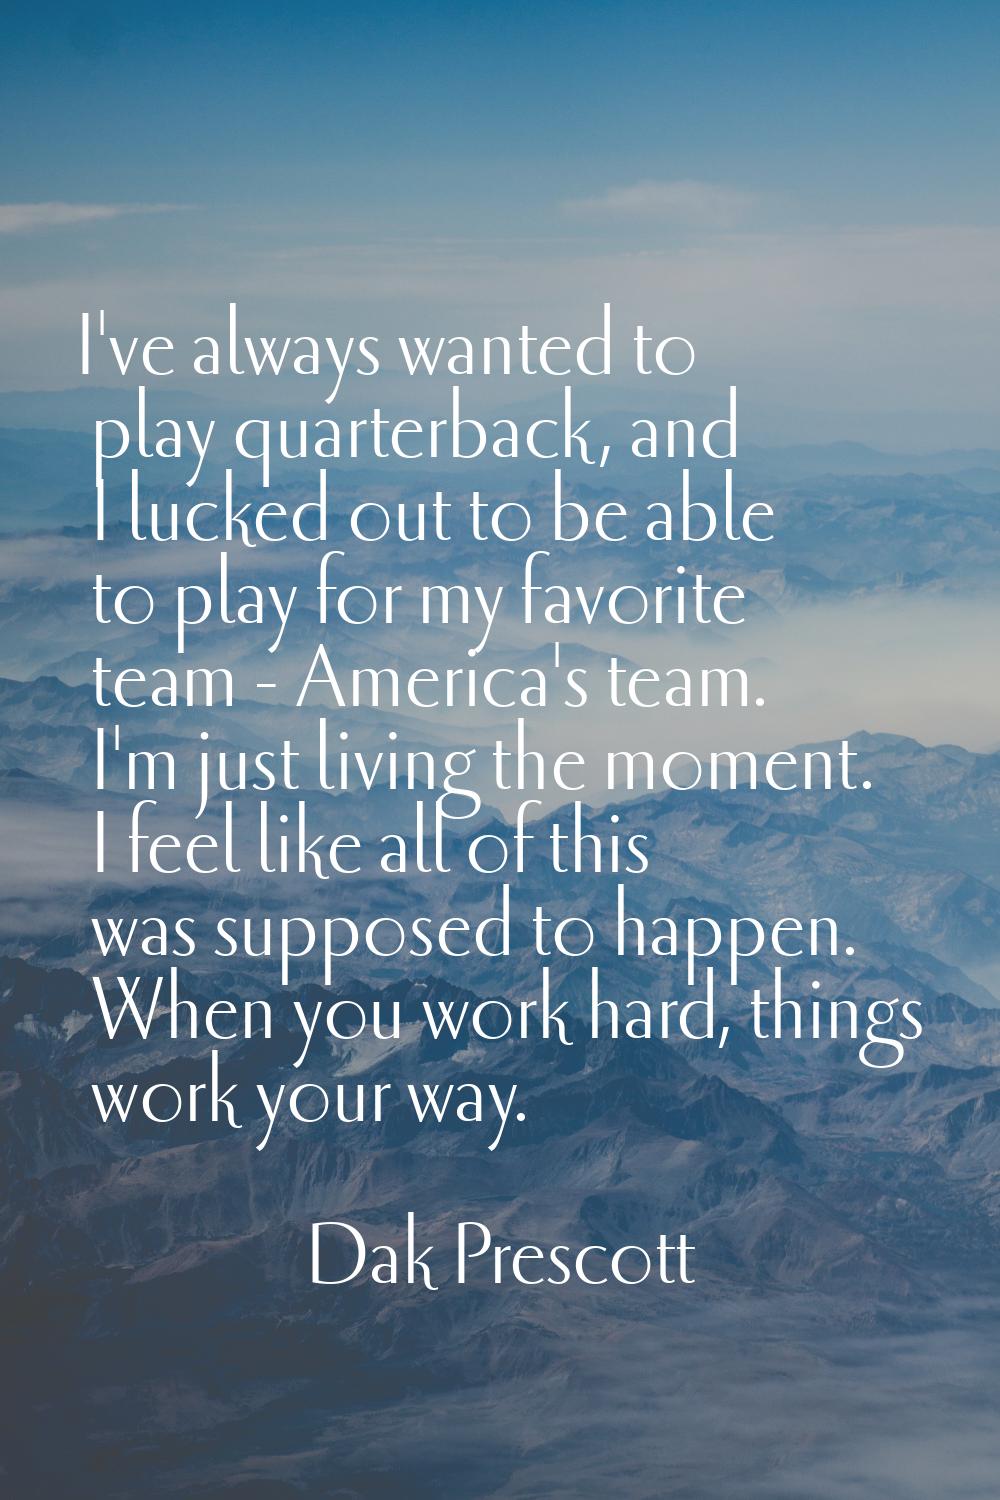 I've always wanted to play quarterback, and I lucked out to be able to play for my favorite team - 